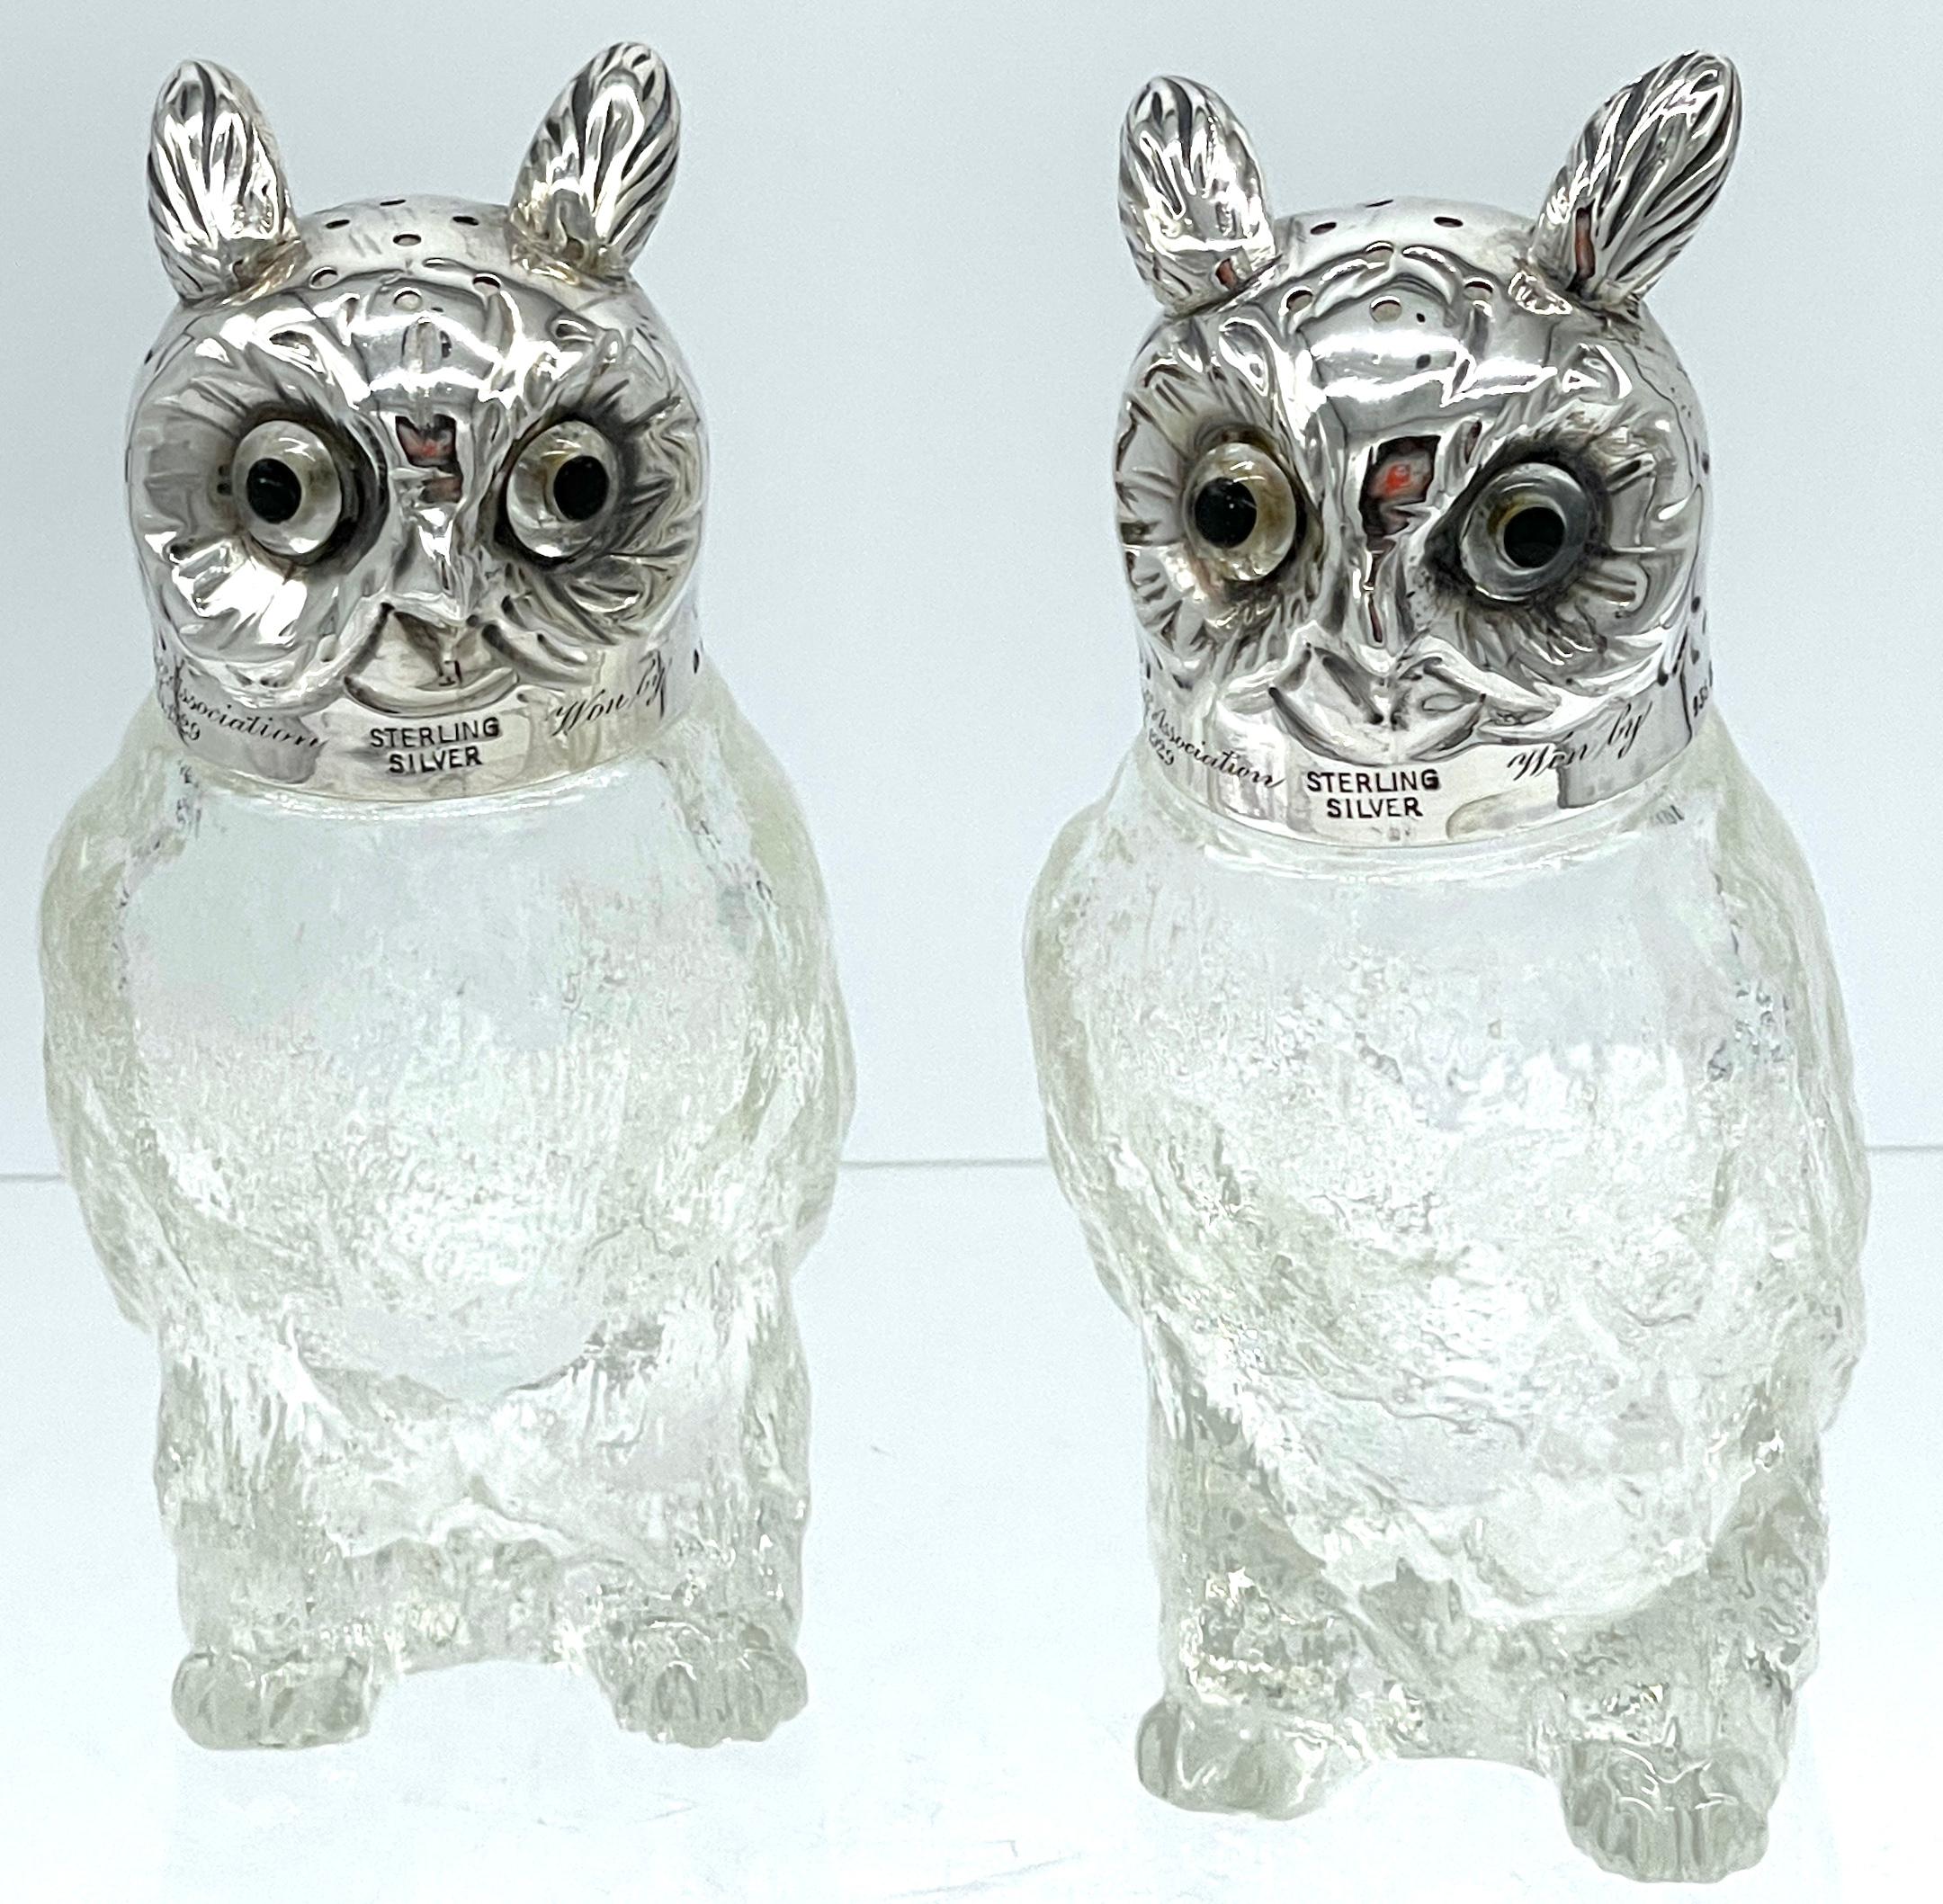 Pair of Austrian Art Deco 'Rock Crystal' and Sterling Owl Salt & Pepper Shakers 
Austria, 1929

A rare find to elevate your dining experience with this exquisite pair of Austrian Art Deco salt and pepper shakers, featuring sterling silver and 